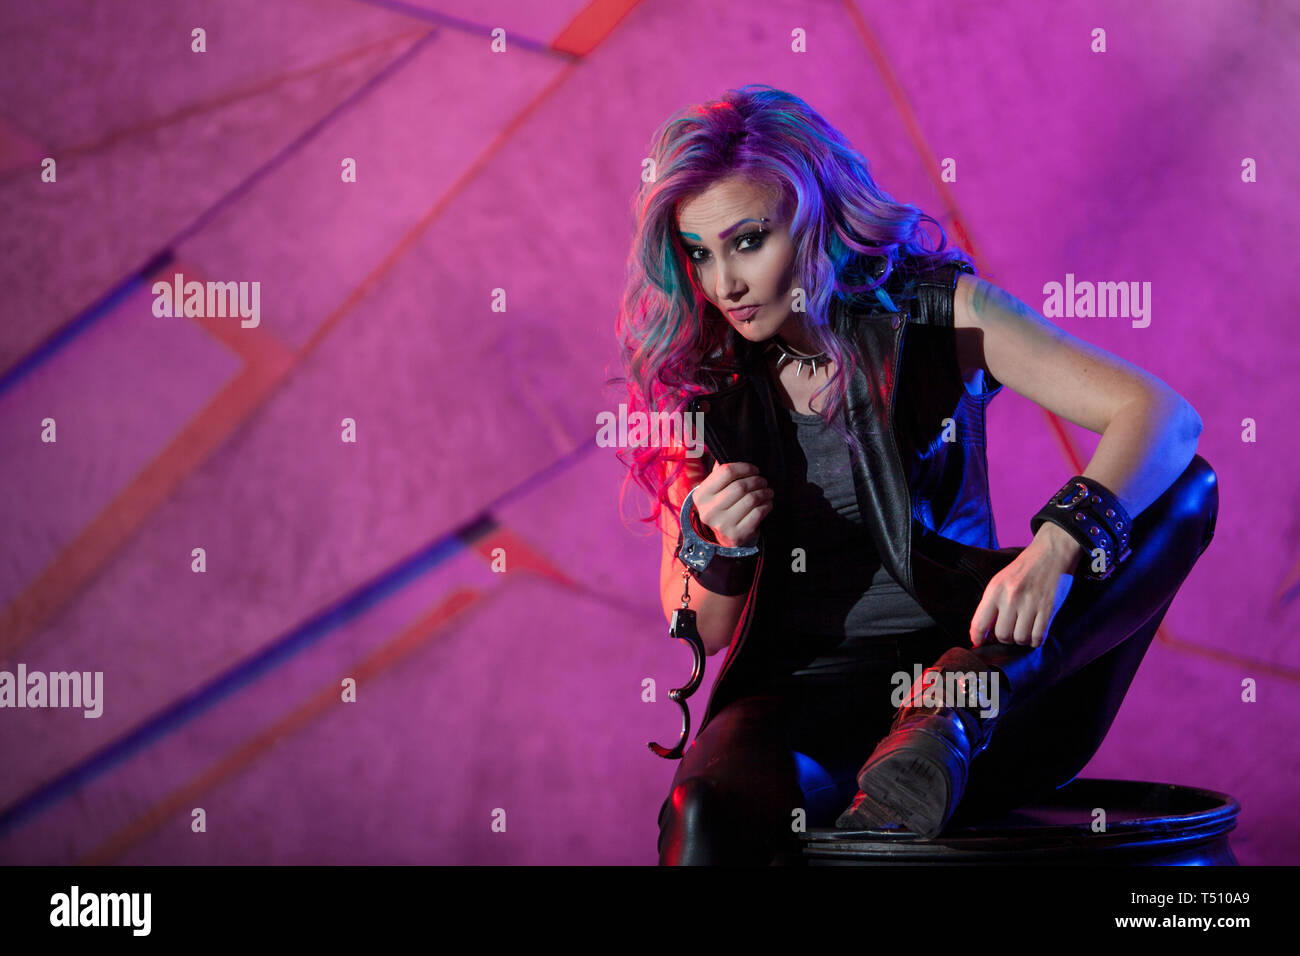 Fashionable young woman in black leather clothes and with colored hair. Bright girl in neon style Stock Photo